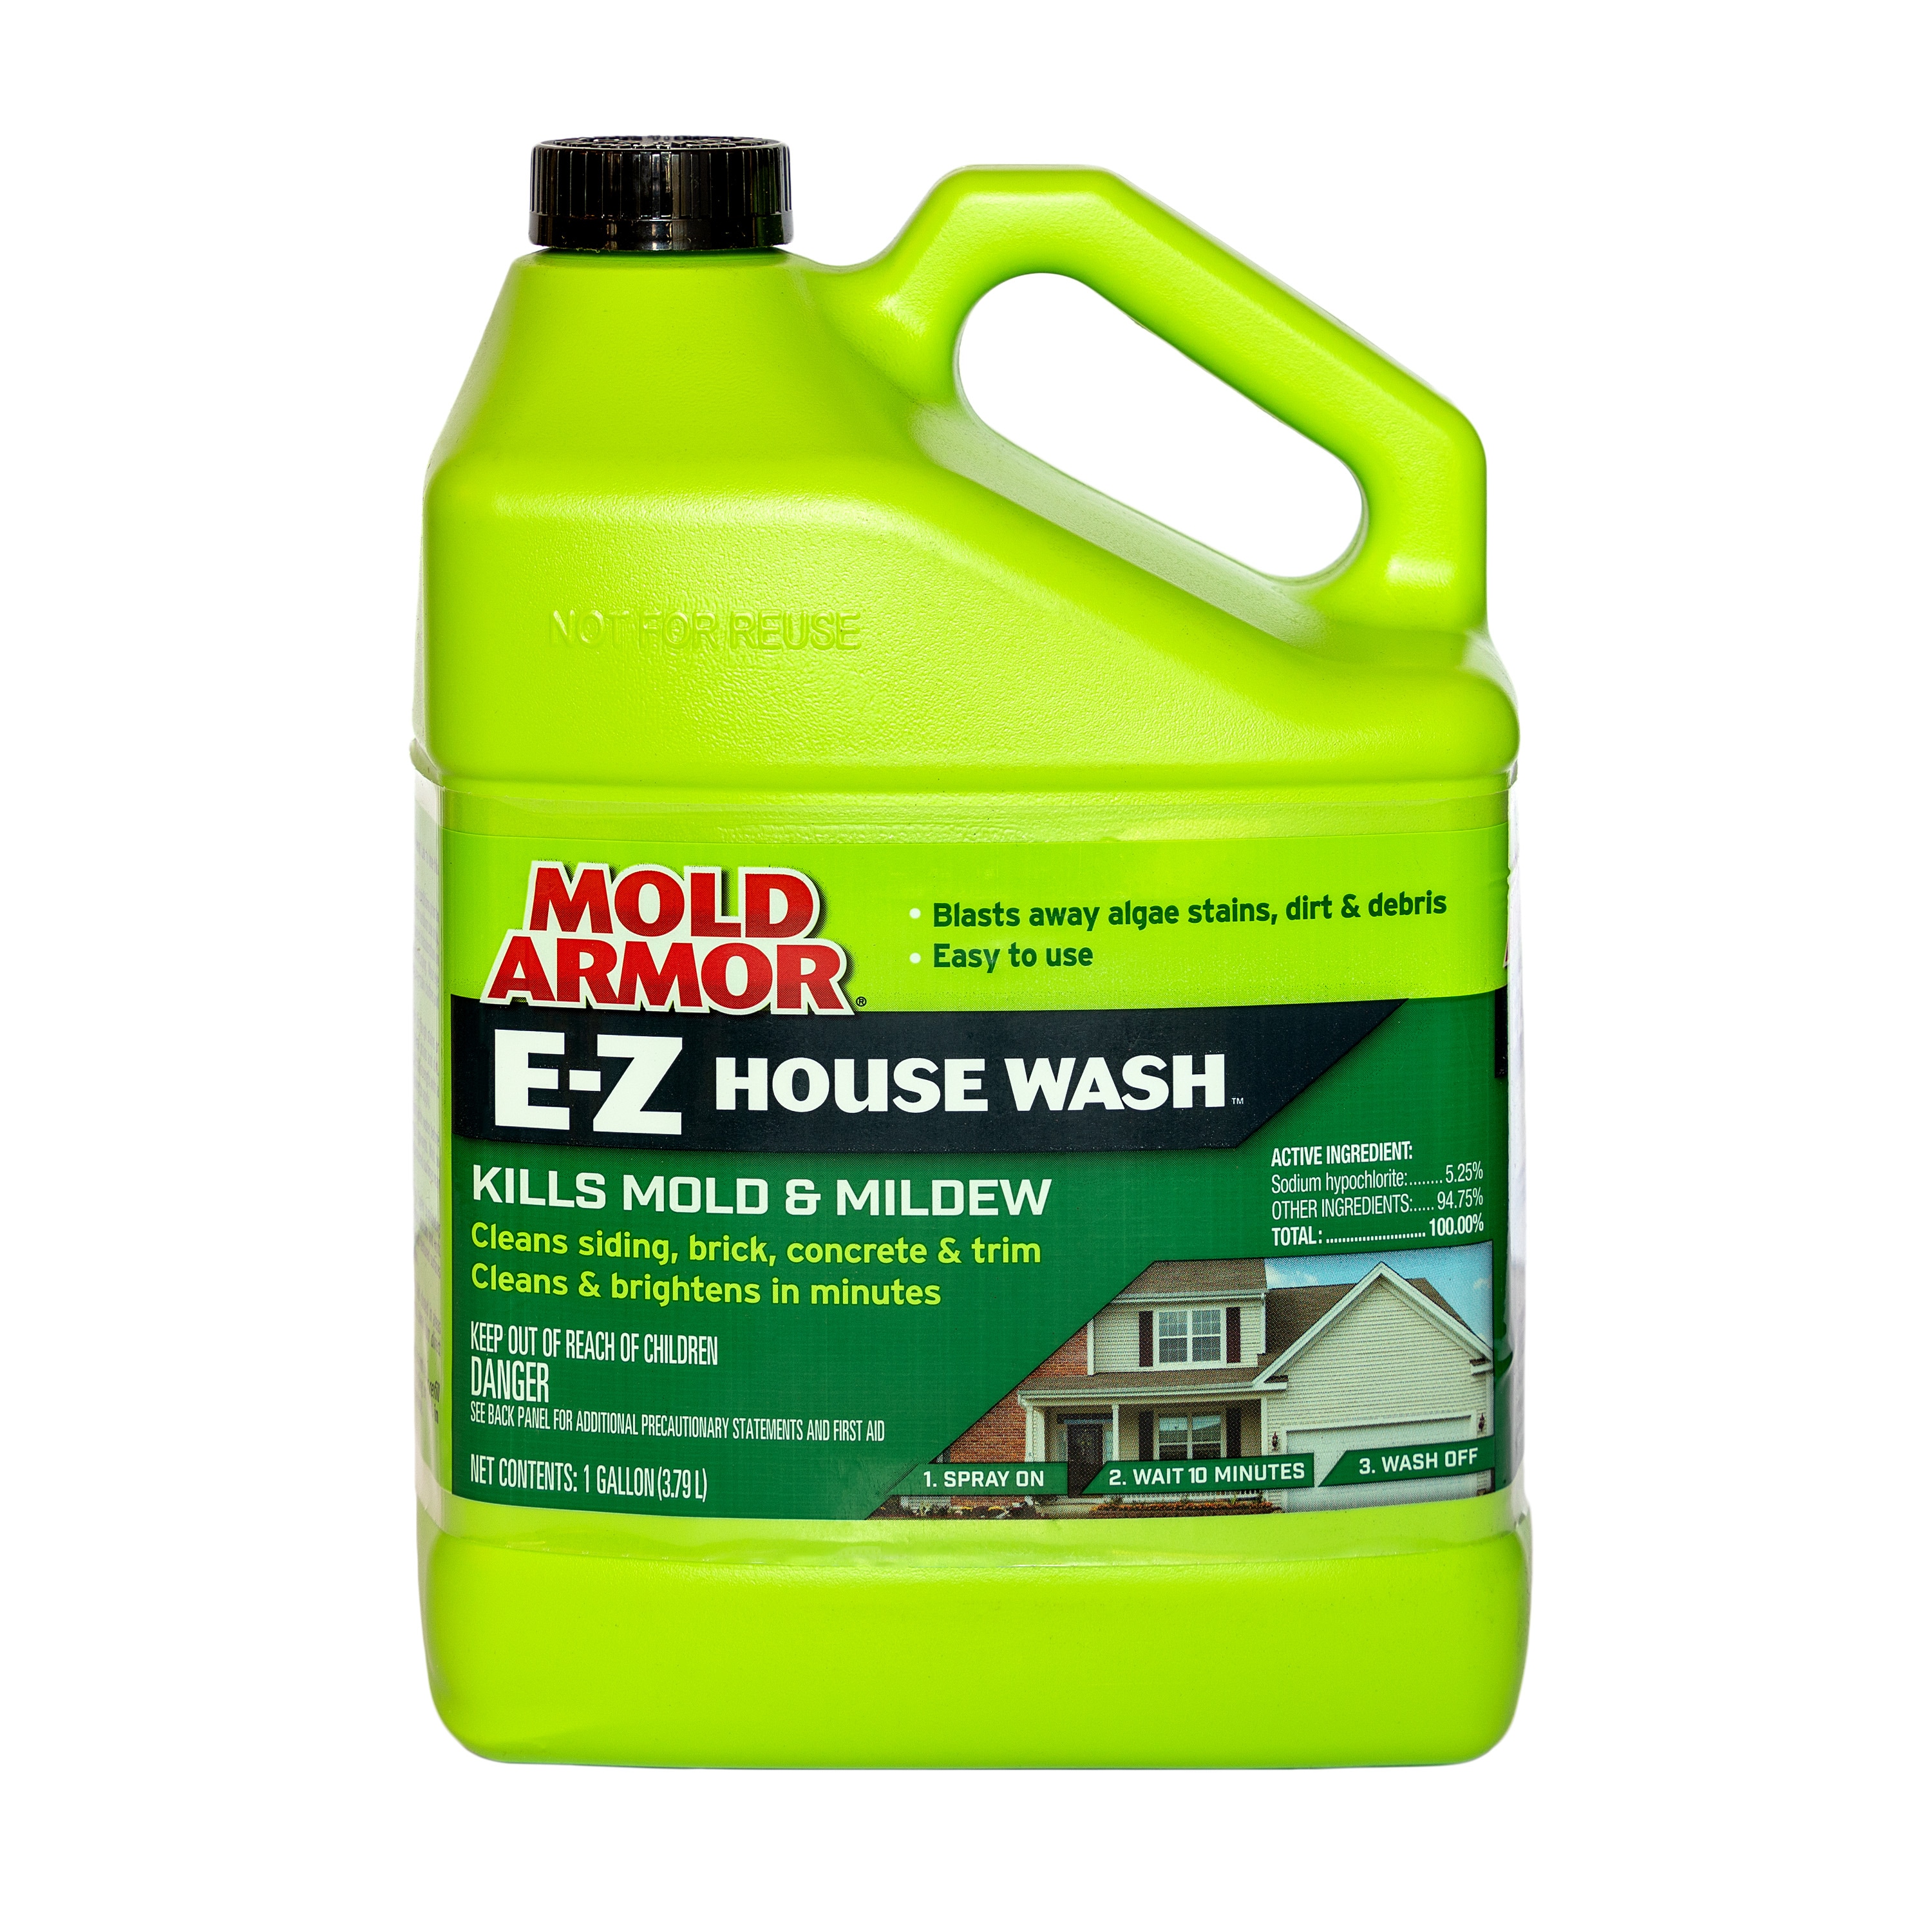 Buy Mold Armor Rapid Clean Remediation Mold & Mildew Cleaner 32 Oz.